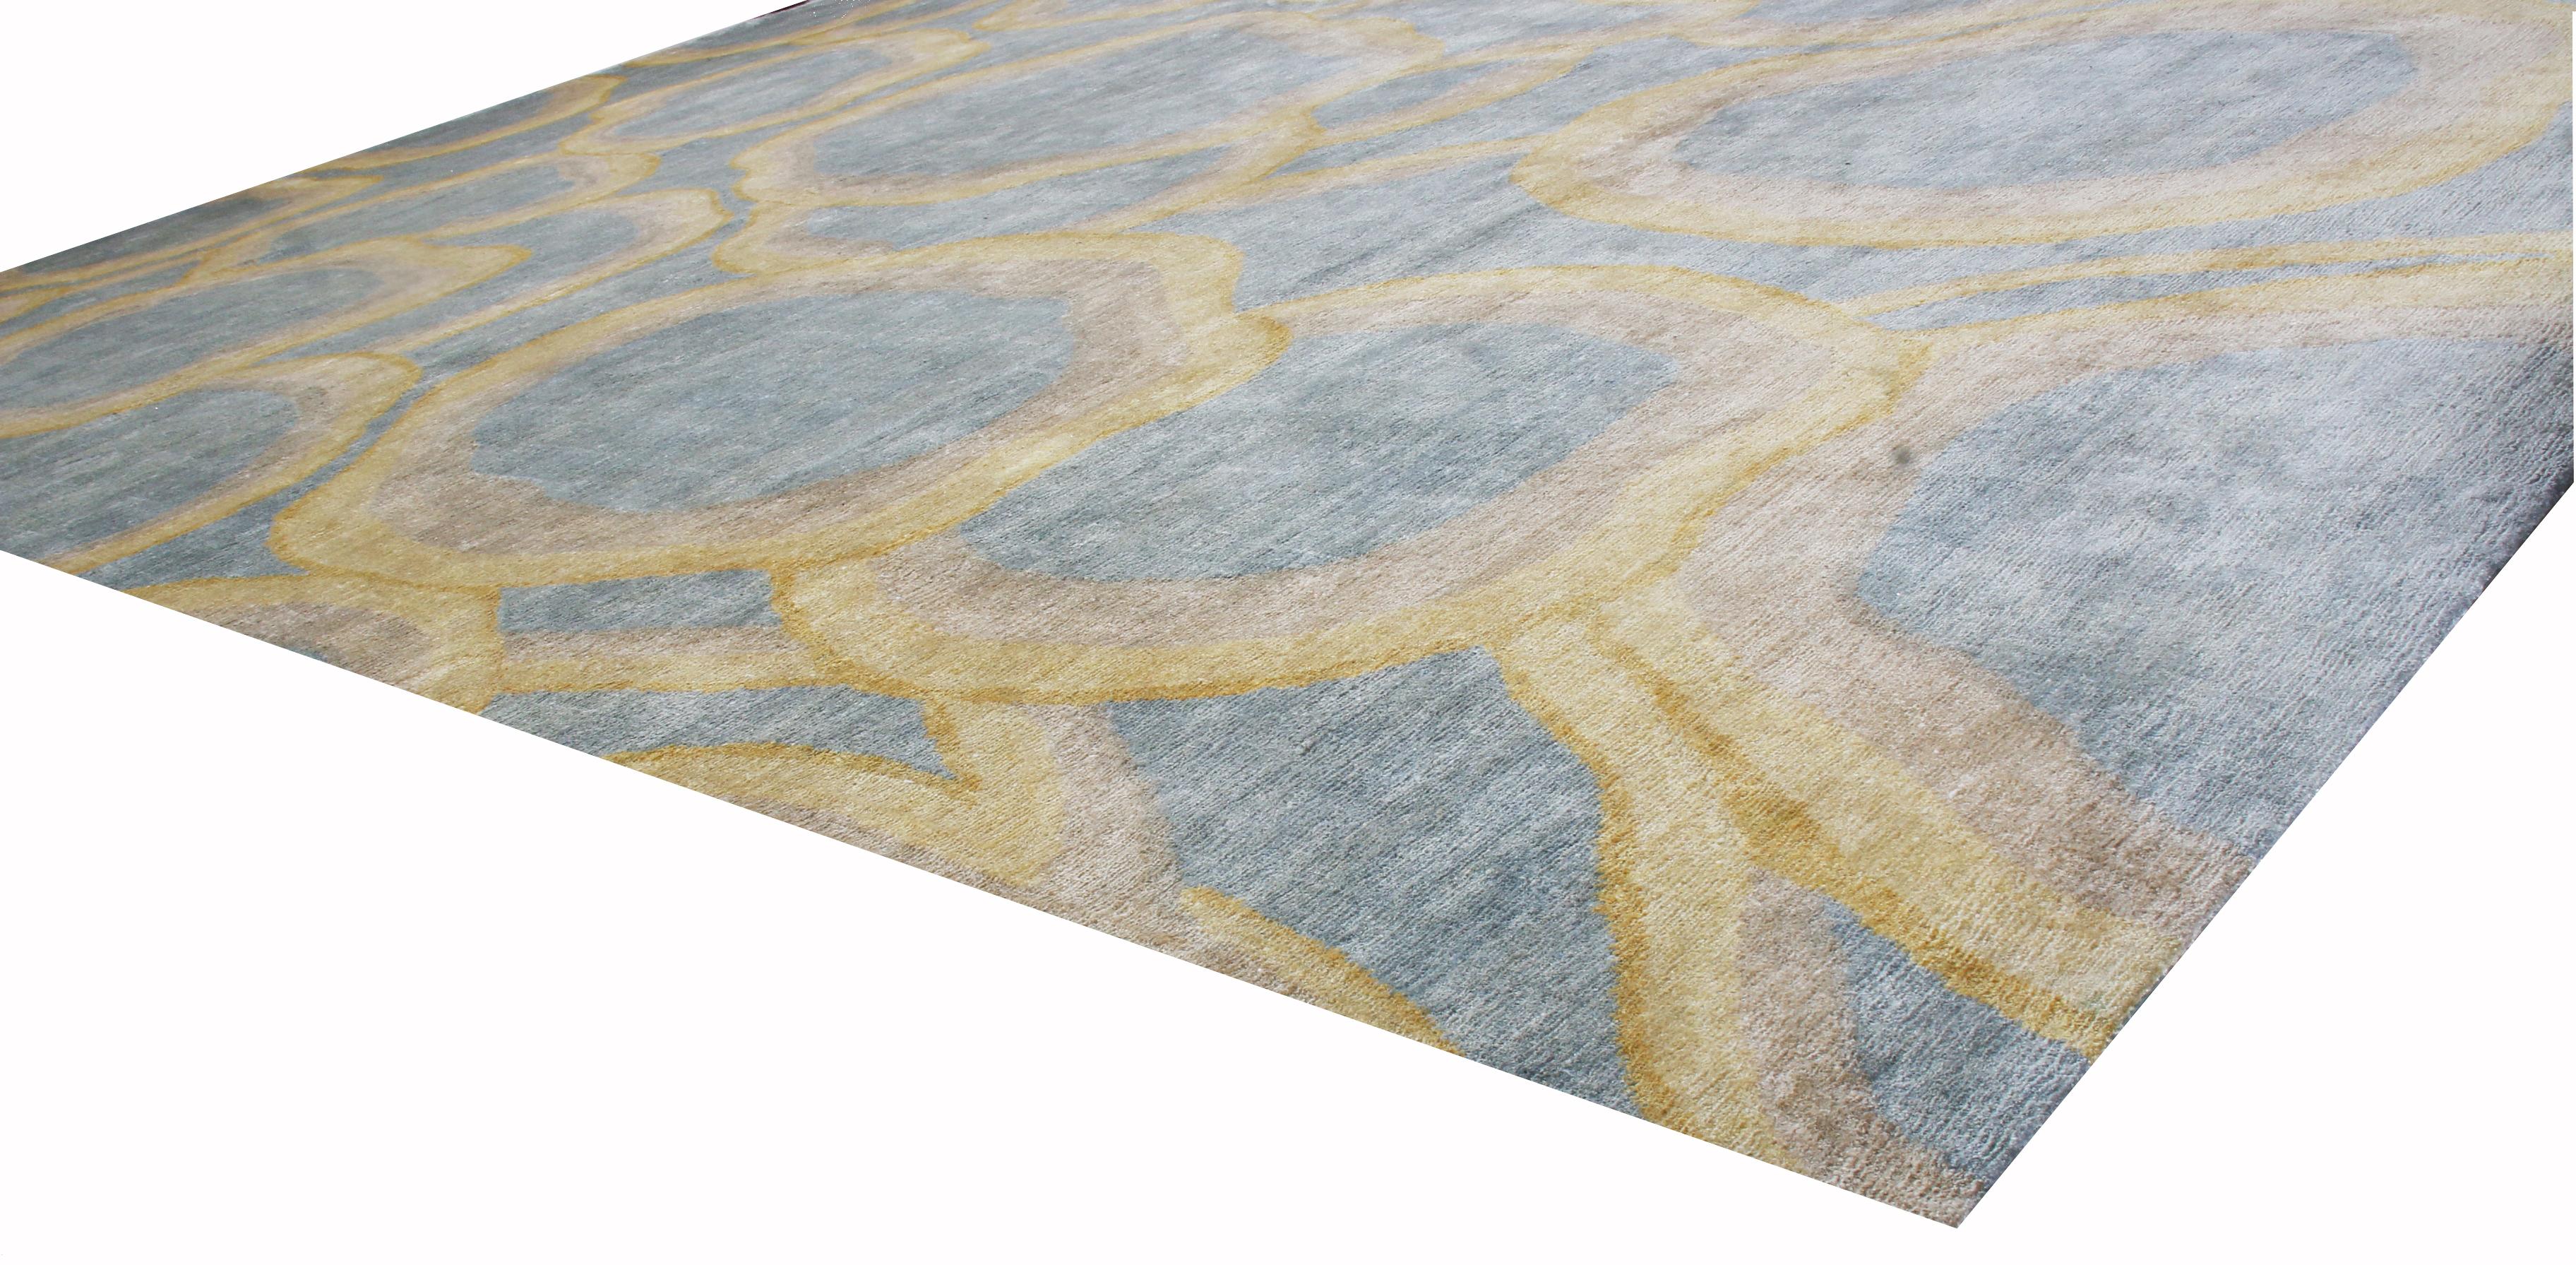 Rug & Kilim’s “Bubbles” rug hails from its newly unveiled custom collection, featuring a lustrous, Abrash background of Industrial, metallic gray with titular golden-yellow bubbles in hand knotted Matka silk, available in full custom